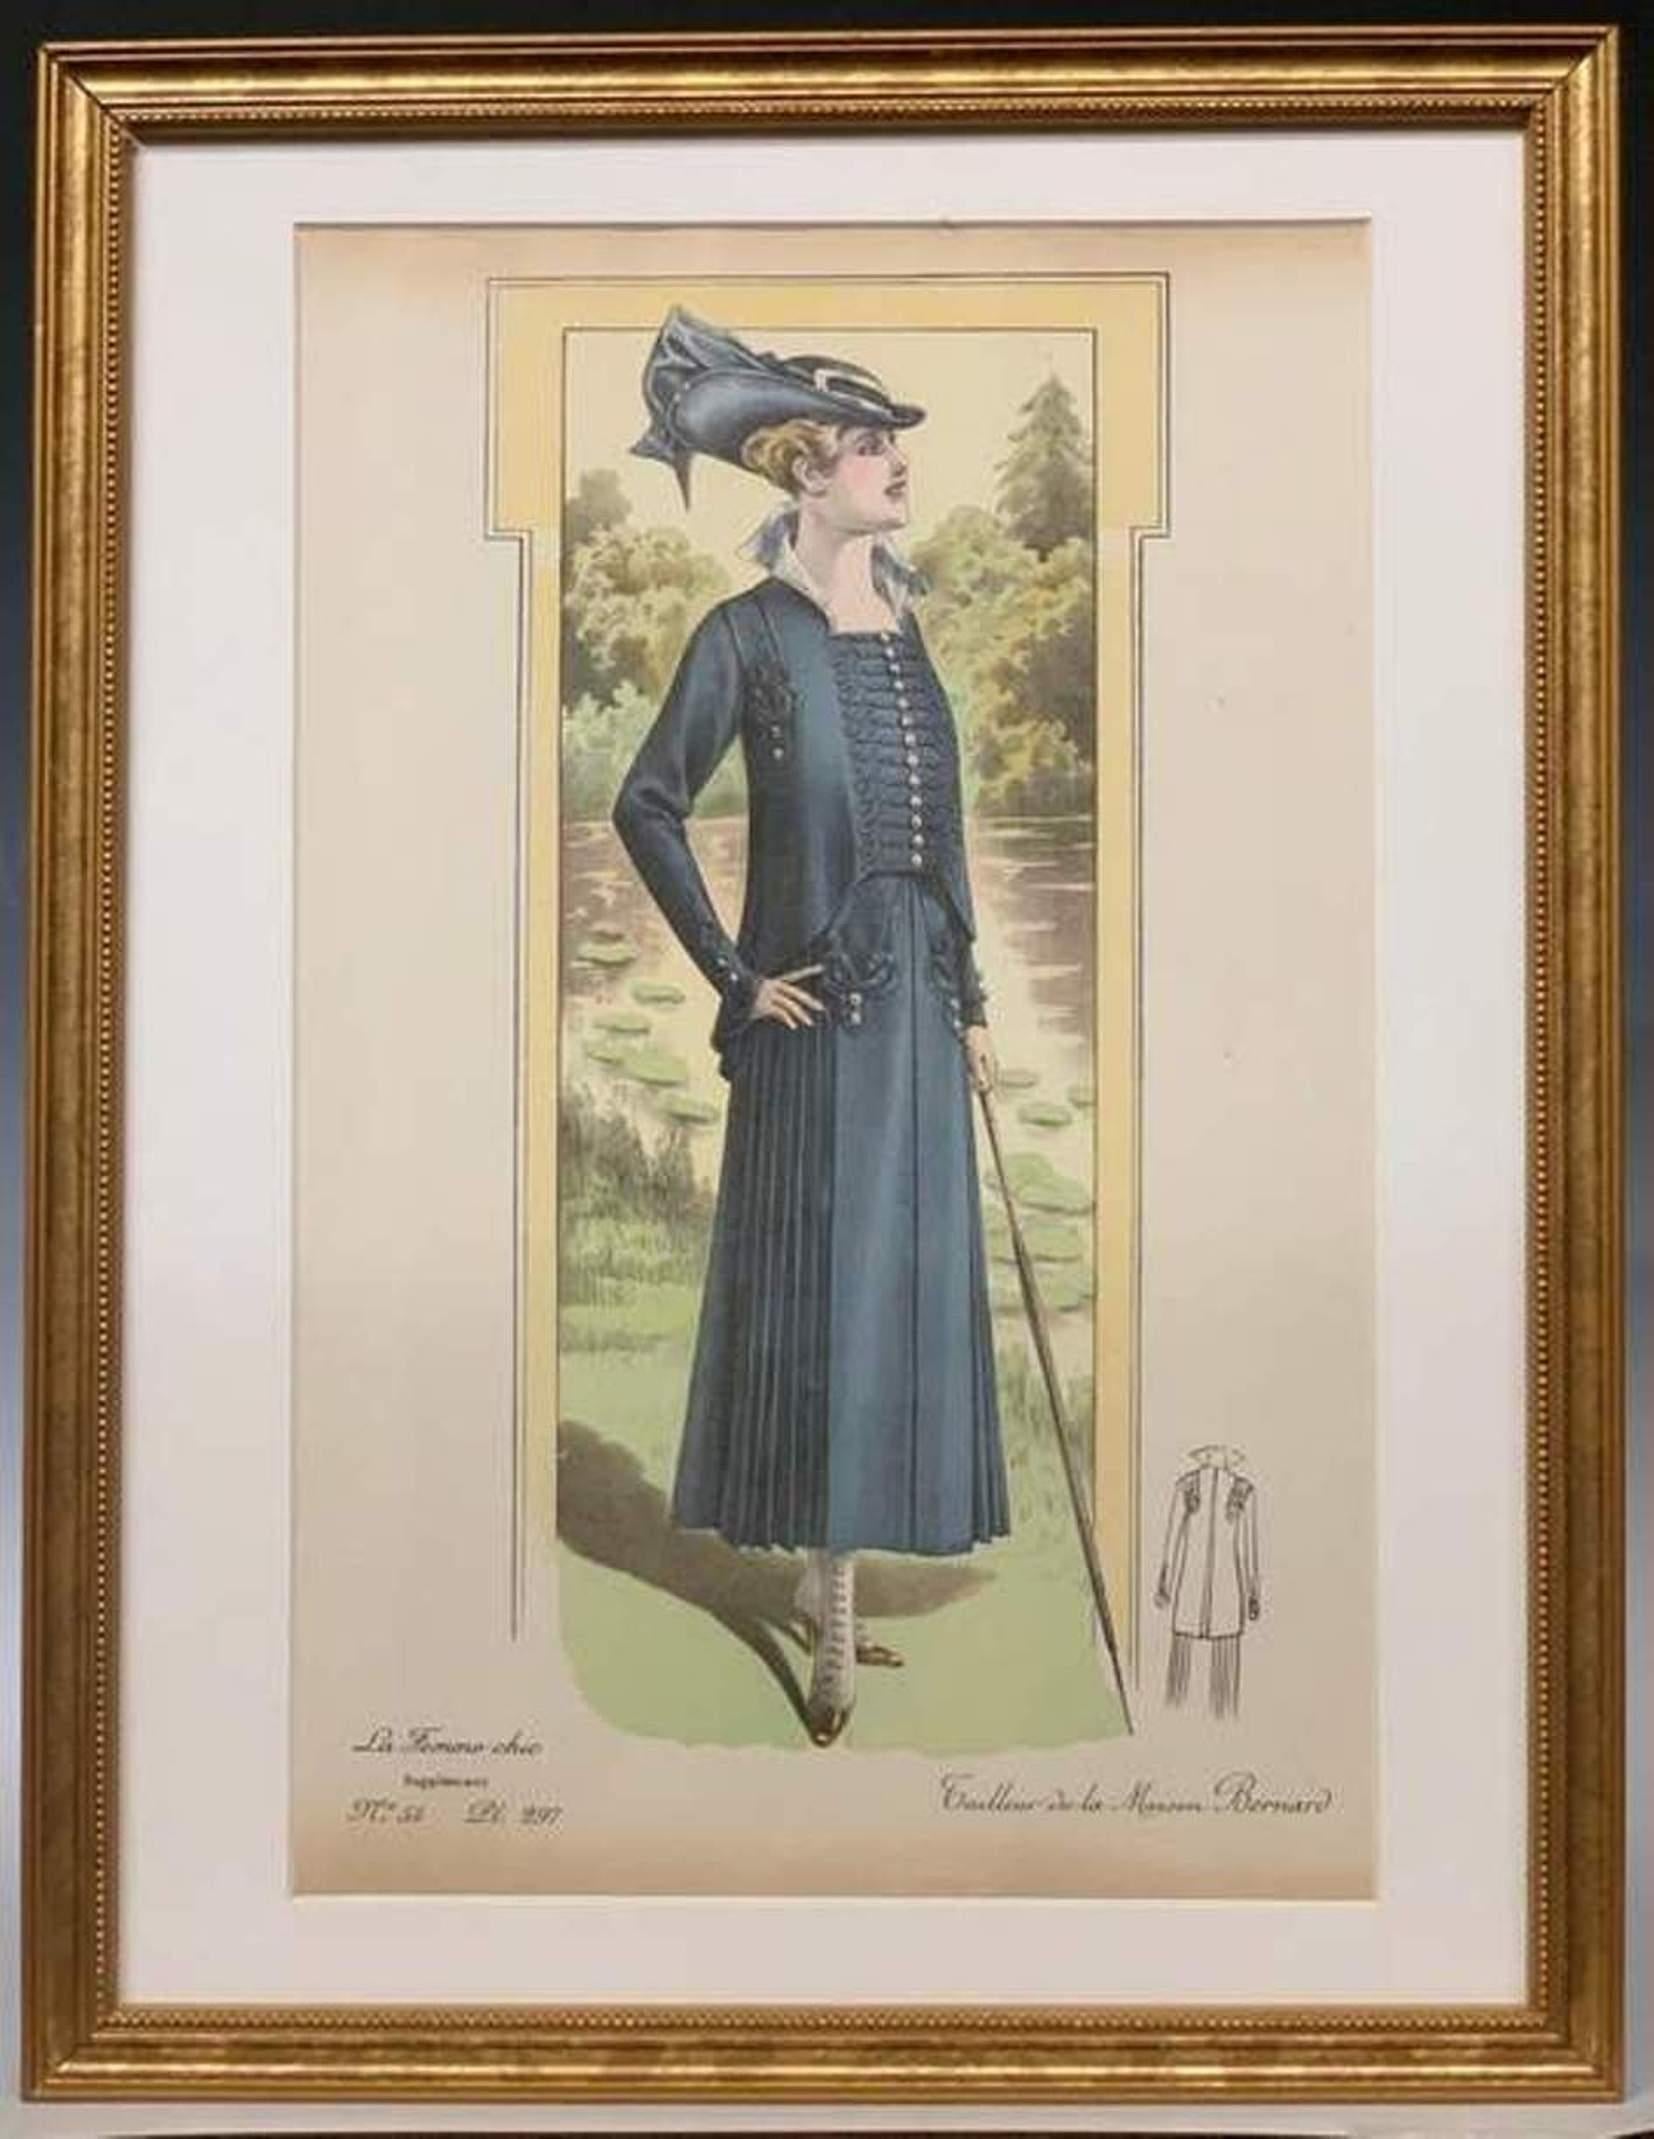 'La Femme Chic' French Belle Époque Fashion Prints, Framed Set
Set of twelve framed original color lithographs of French fashions from 'La Femme Chic' 
1914. La Femme Chic was an important French periodical that debuted in the early 1900s 
and